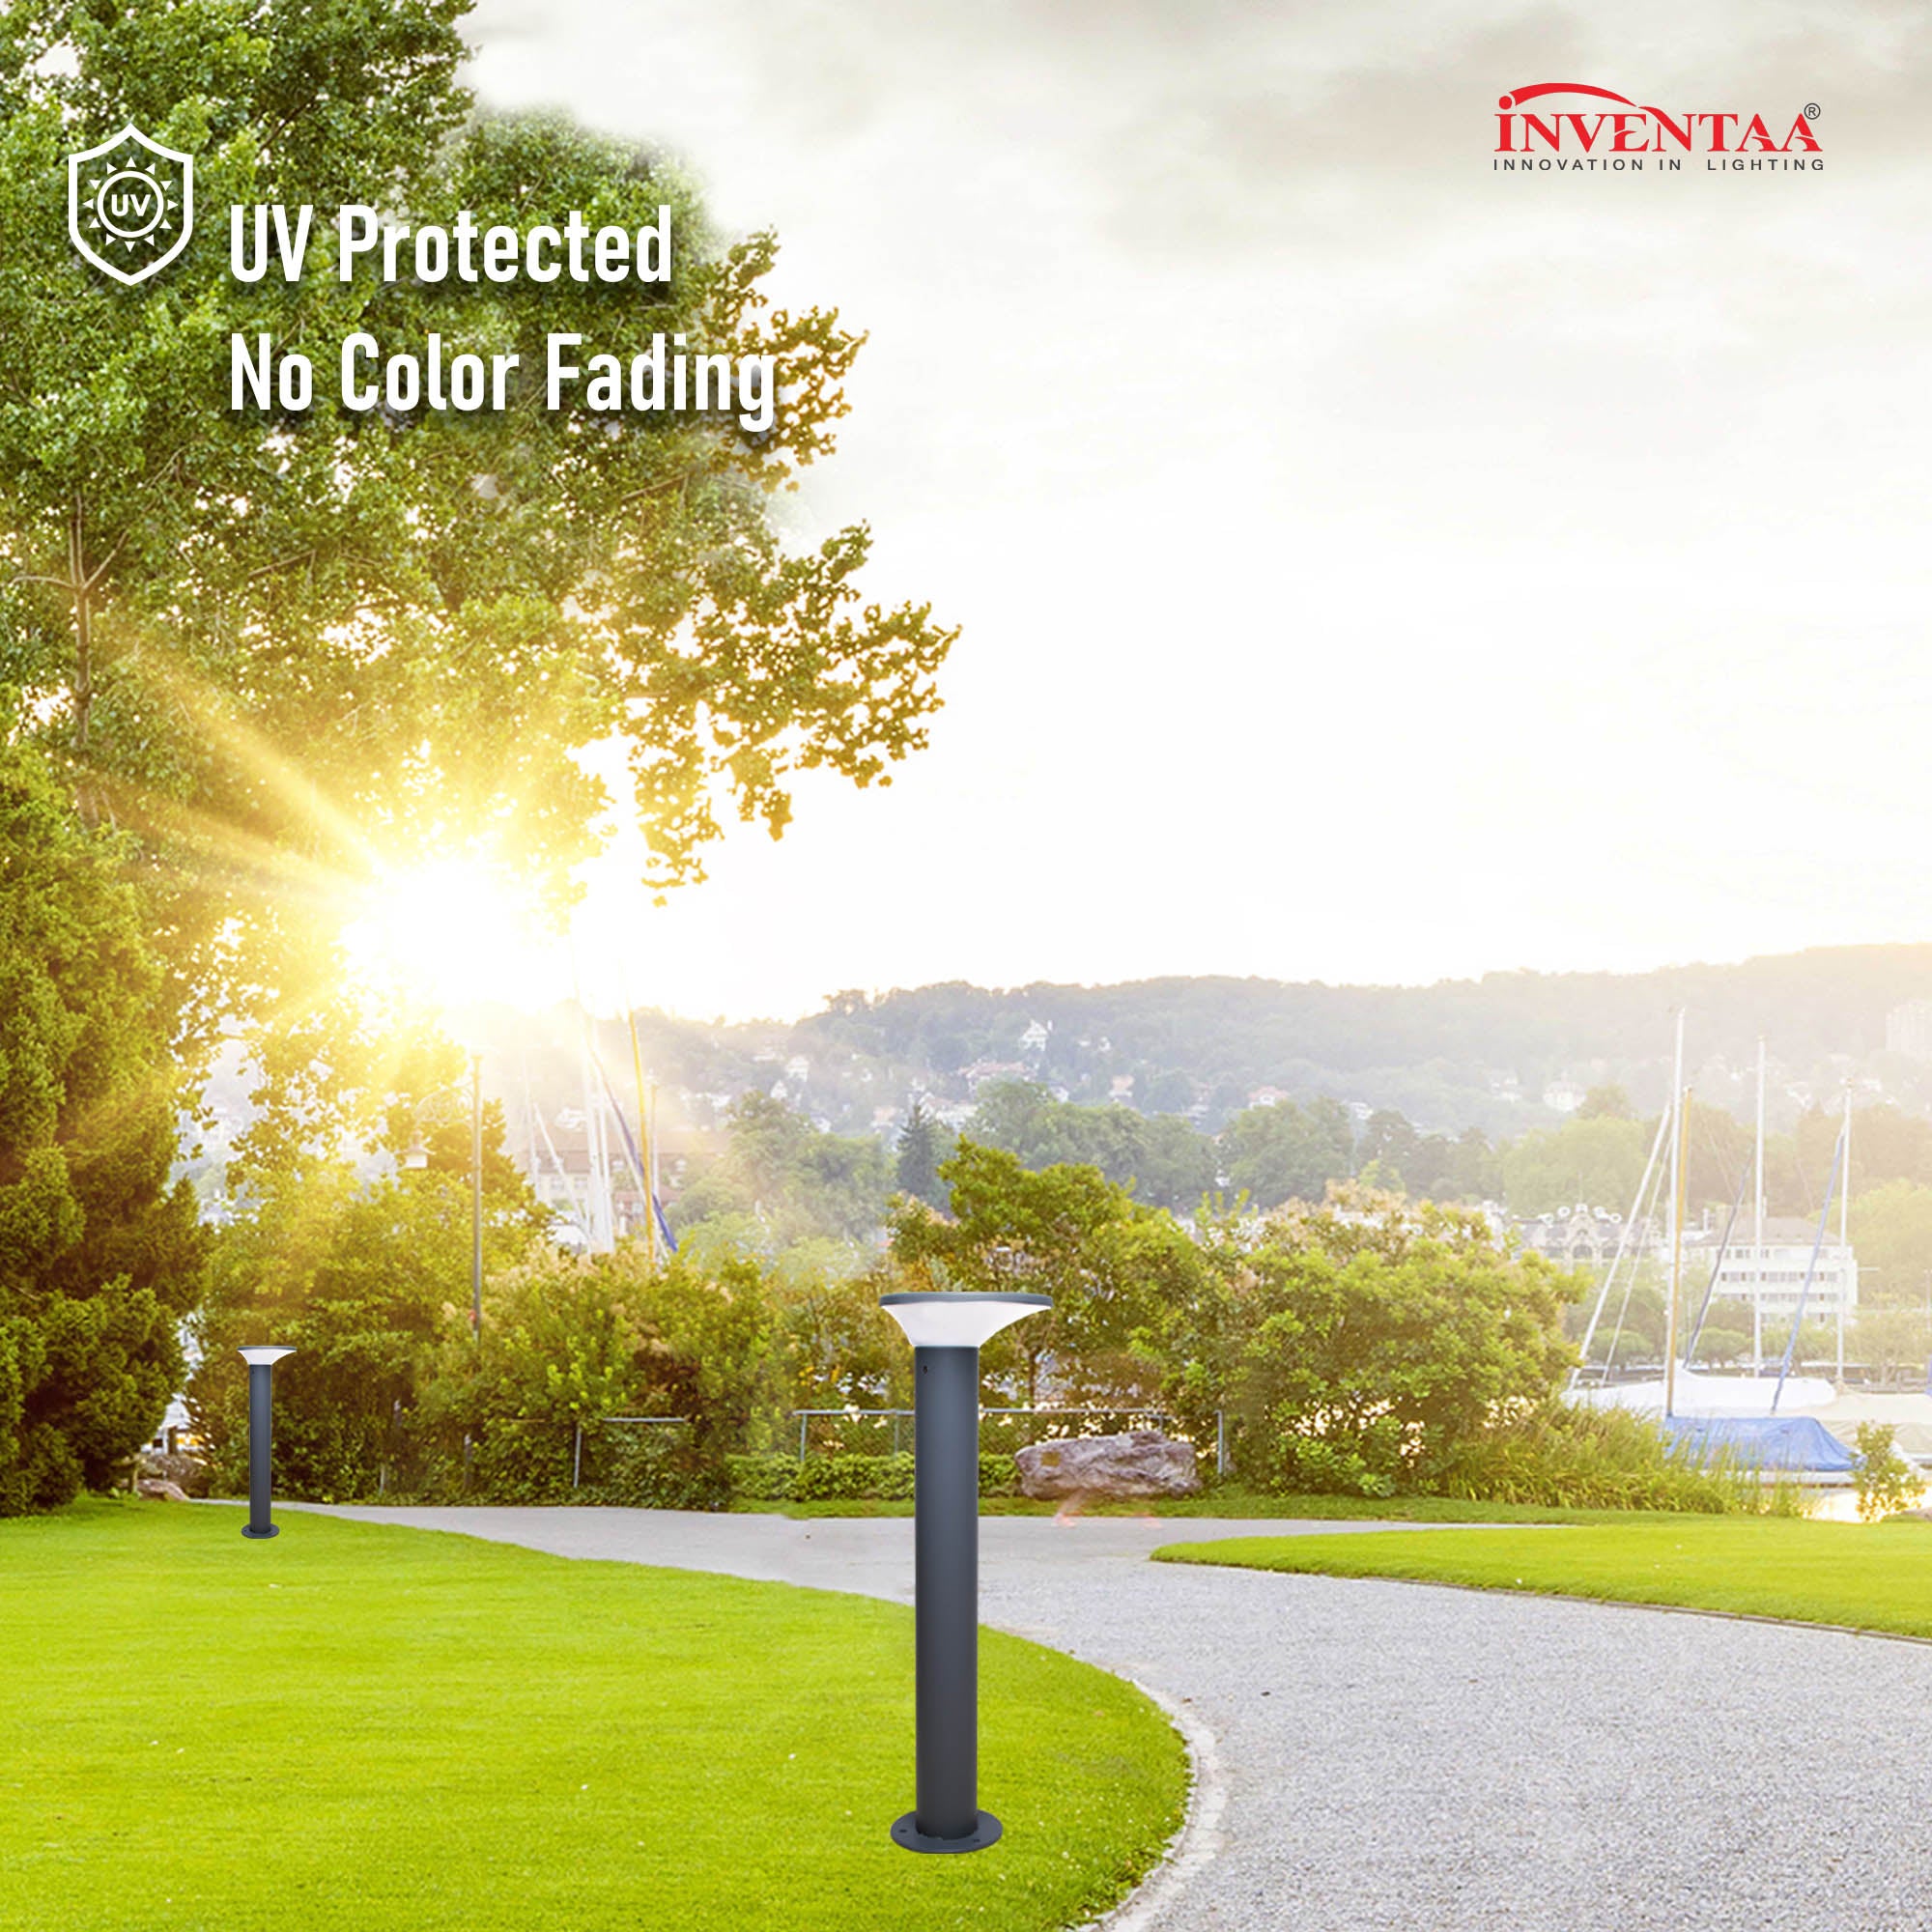 Romy 1 feet led garden bollard light featuring its UV protection and no color fading resistance for enduring performance #size_1 feet